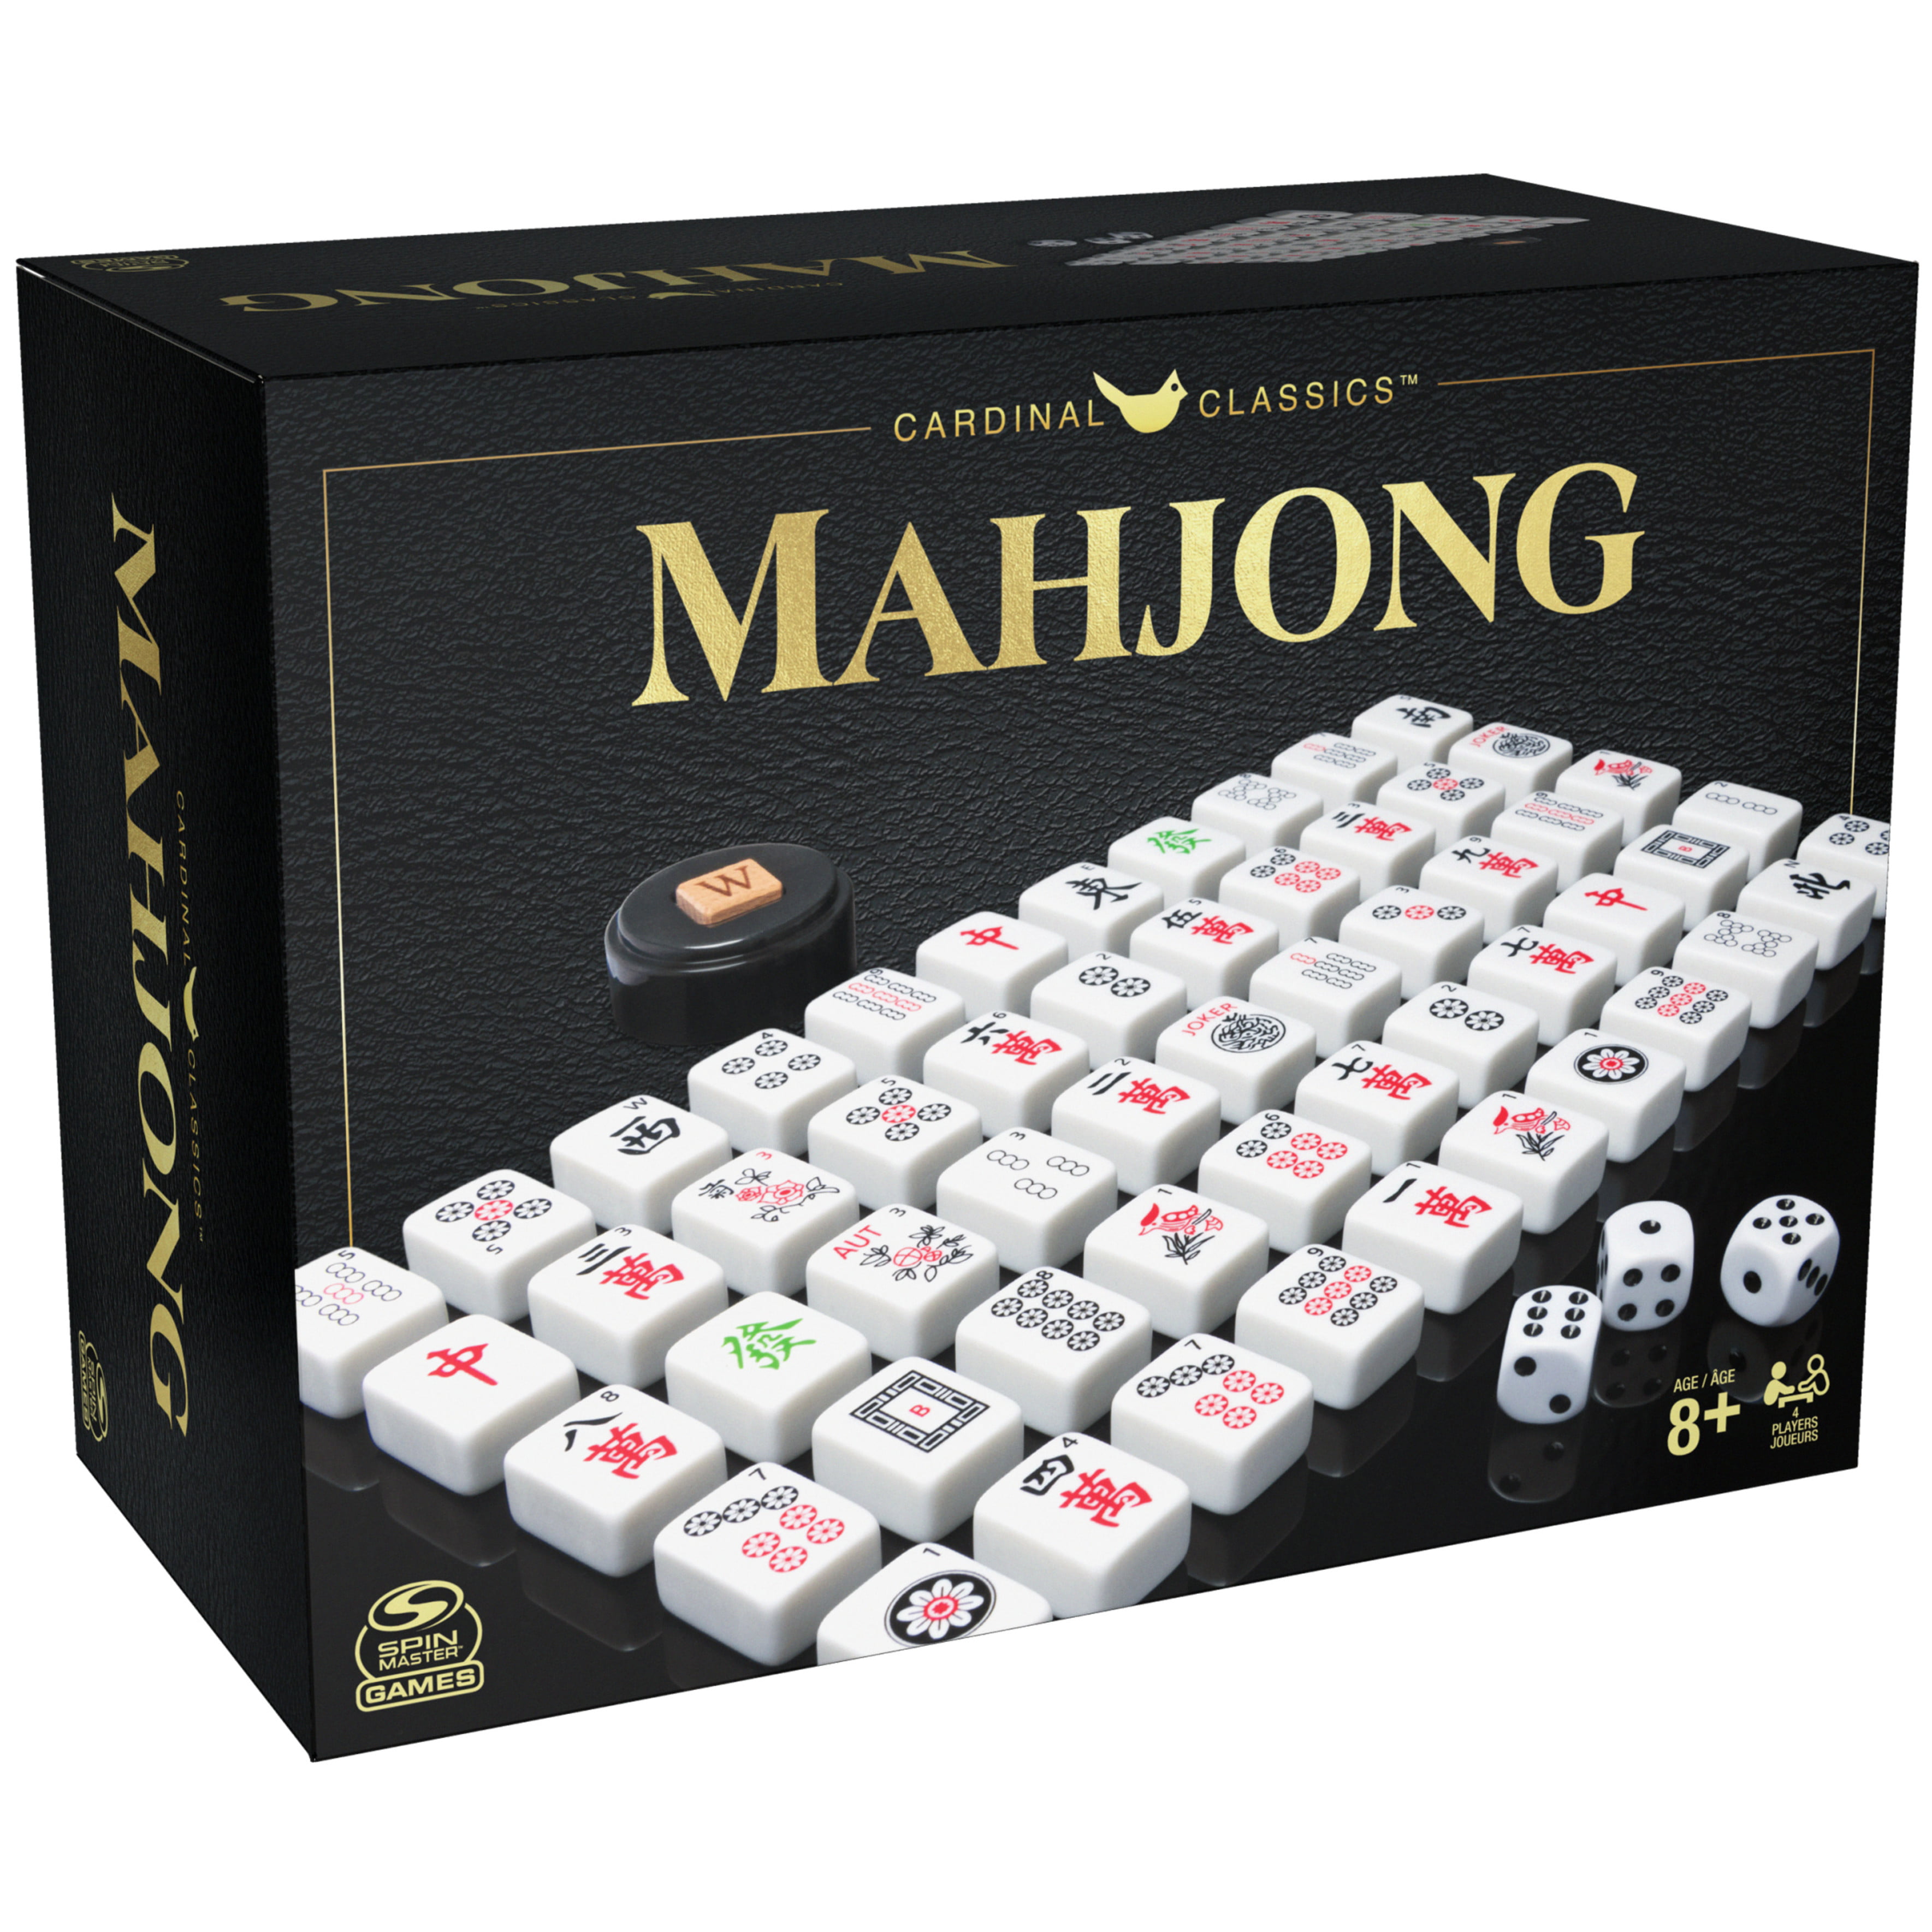 Play Mahjong Classic Game Online For Free - Start Playing Now!